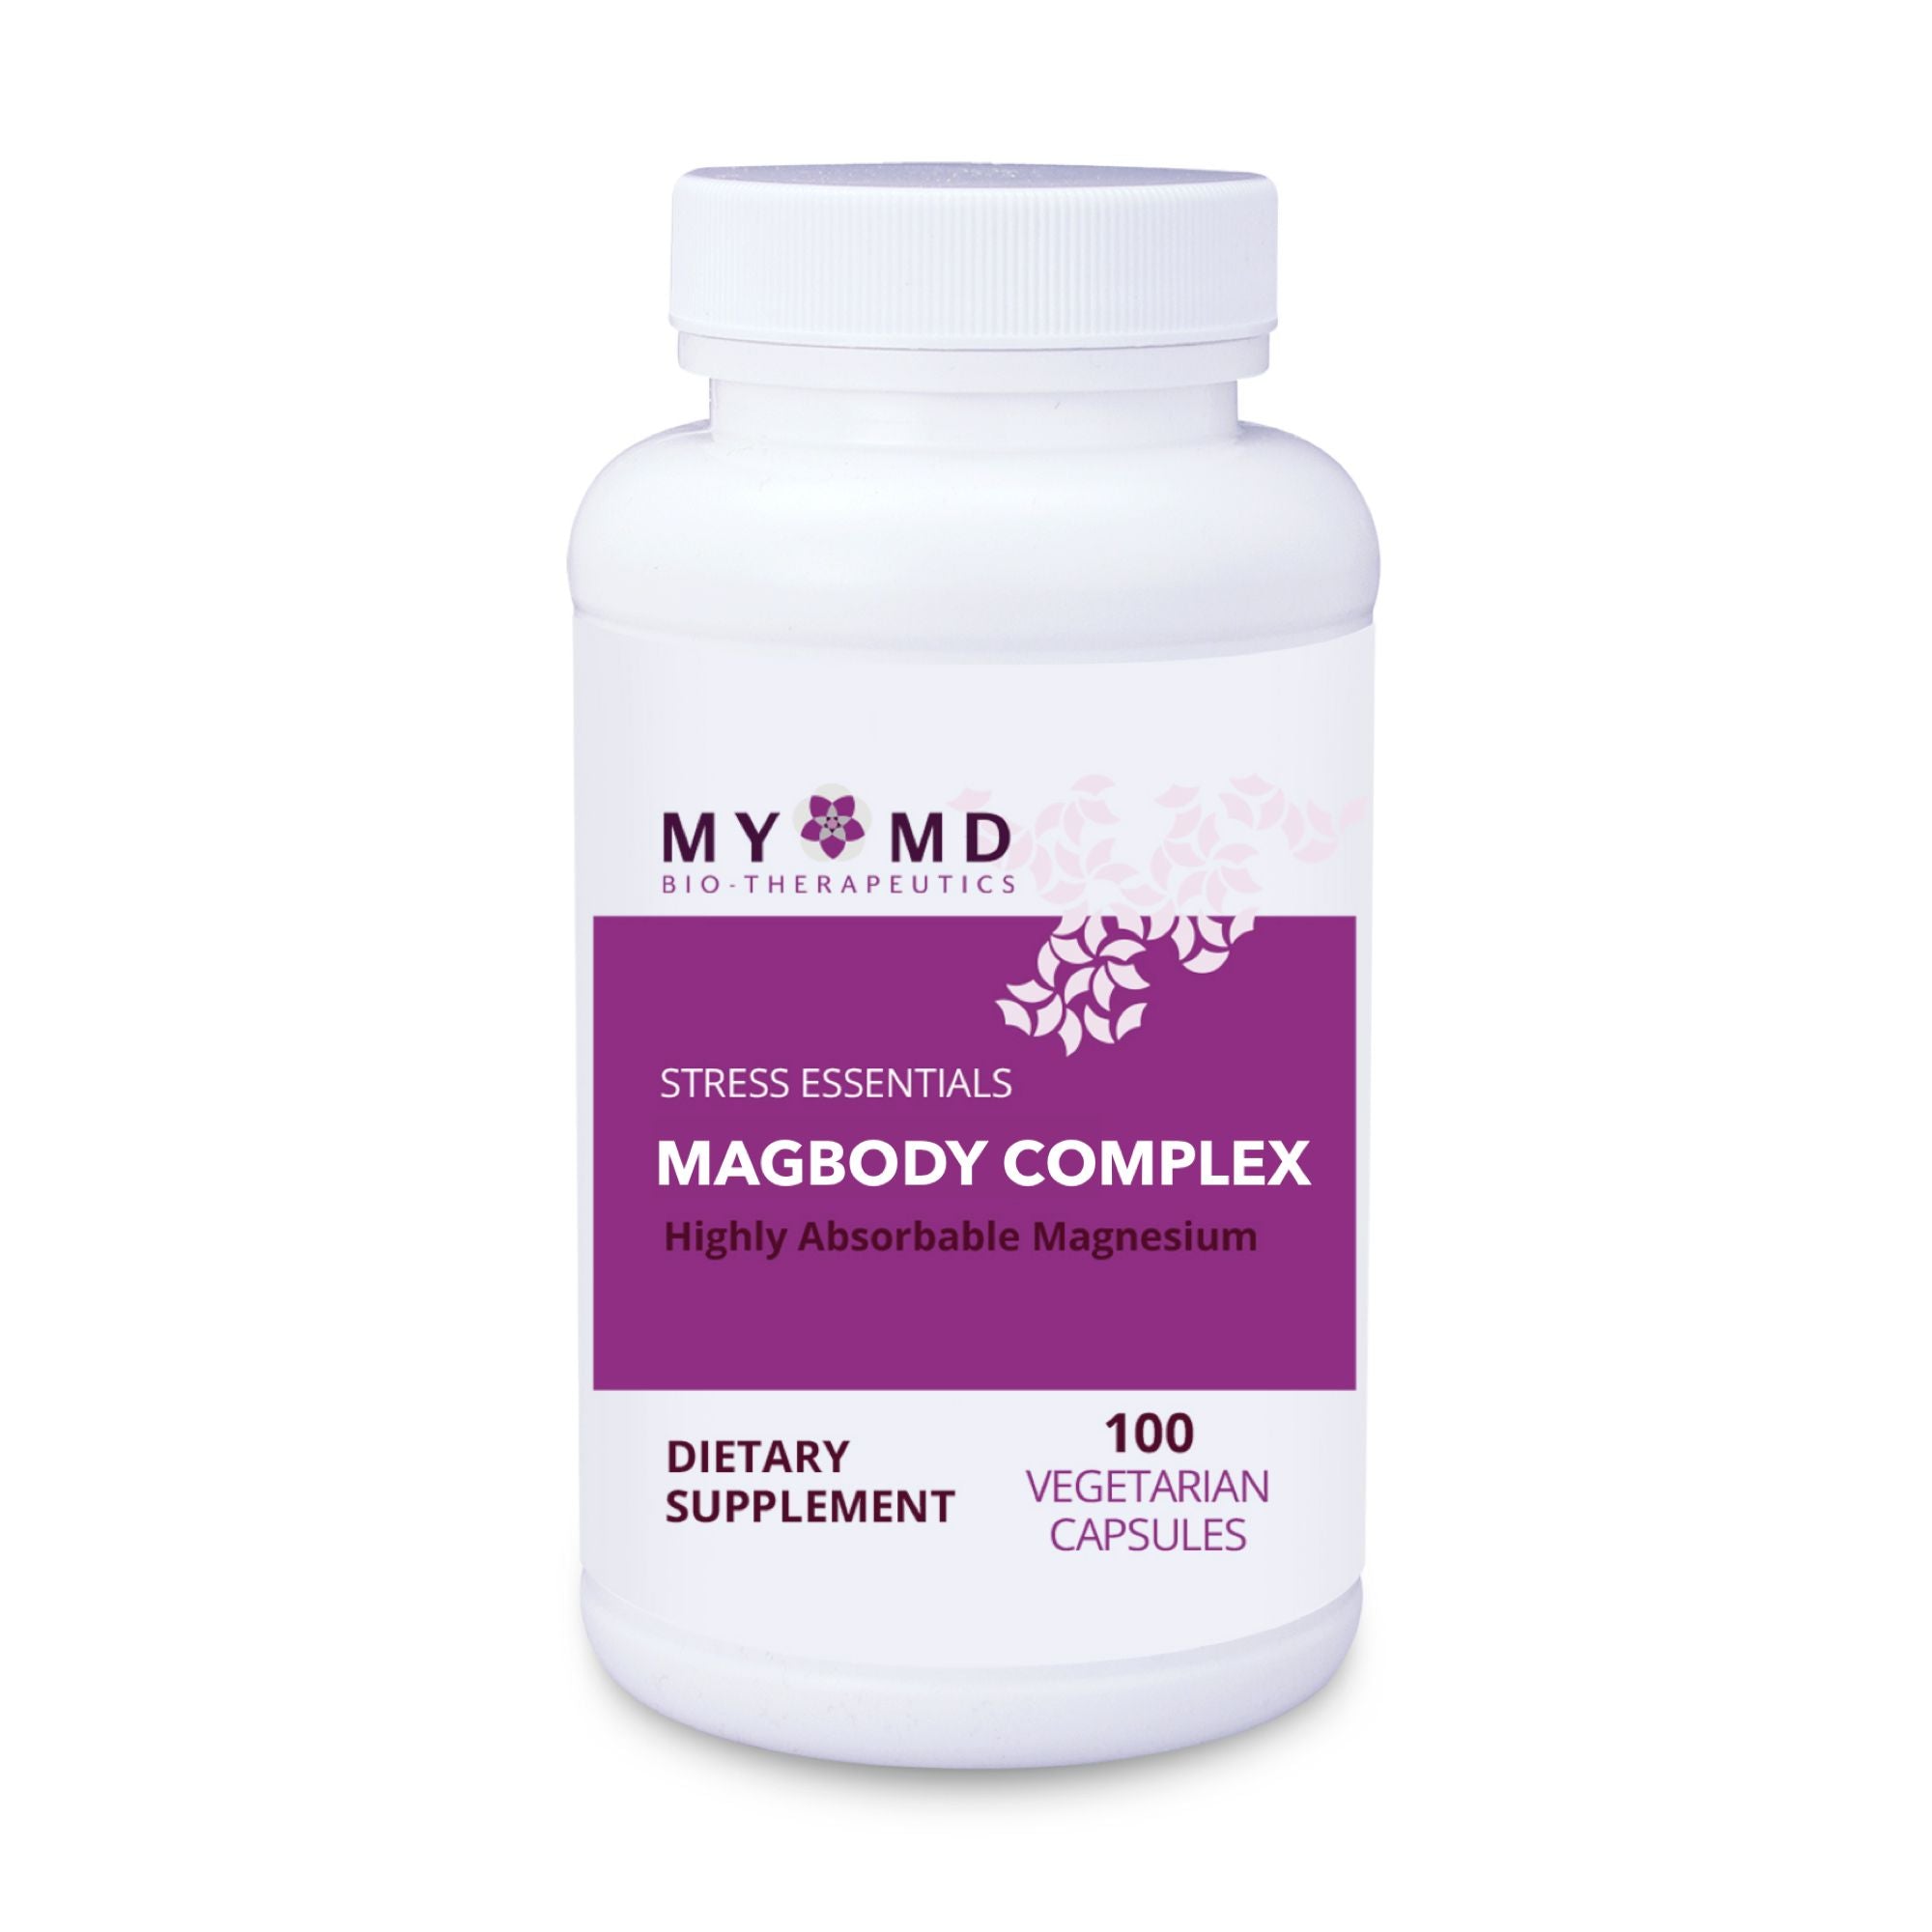 MagBody Complex (formerly Pro-MagX)